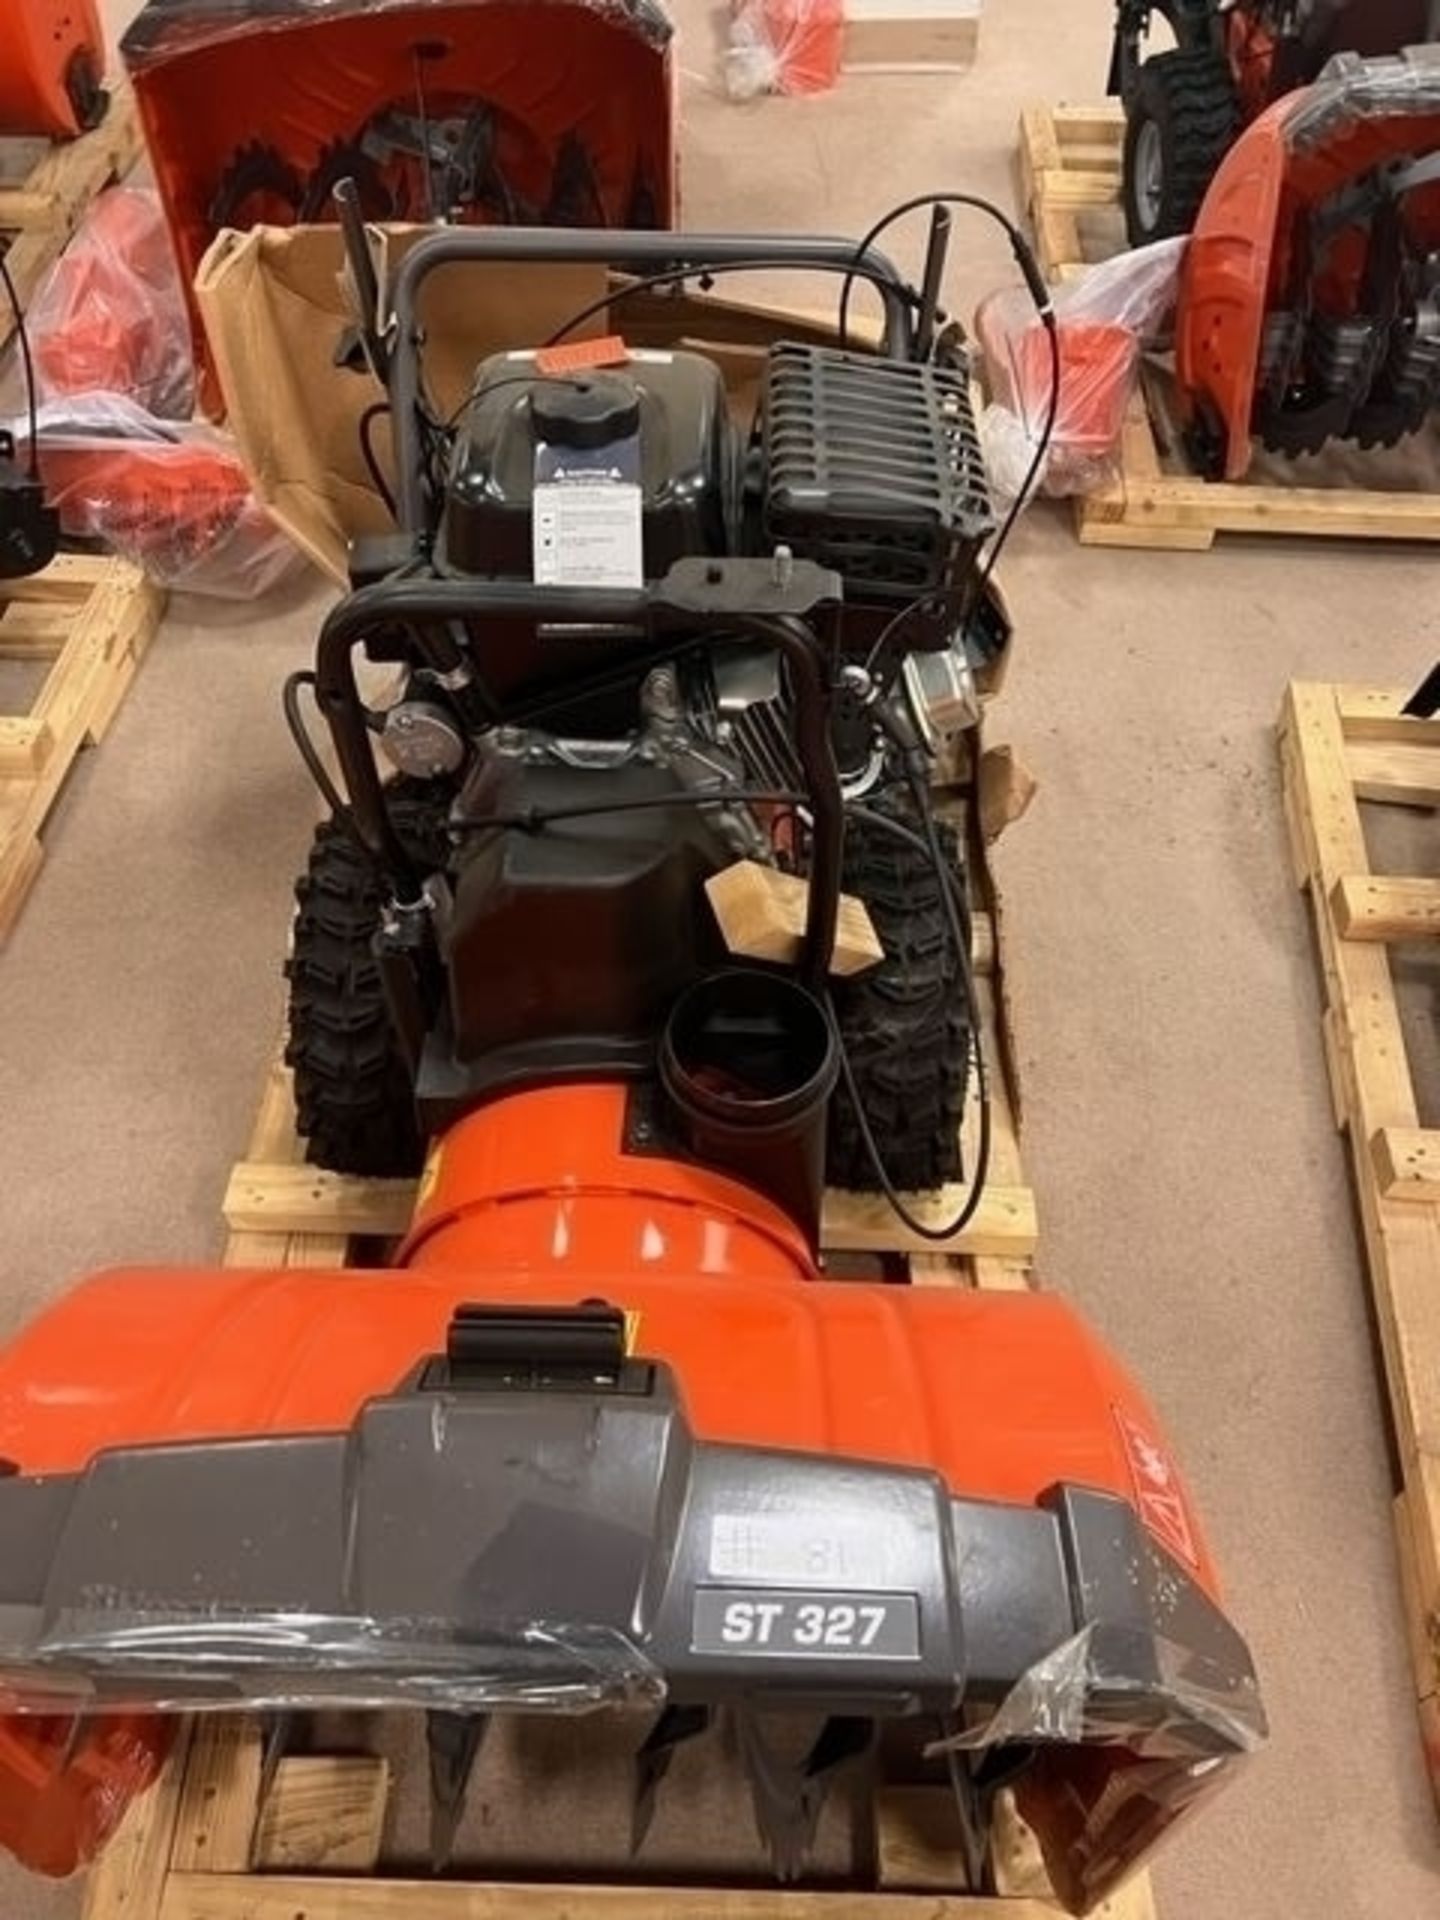 Husqvarna ST 327 Self Propelled Snow Blower - Approx MSRP $1399 - Image 3 of 4